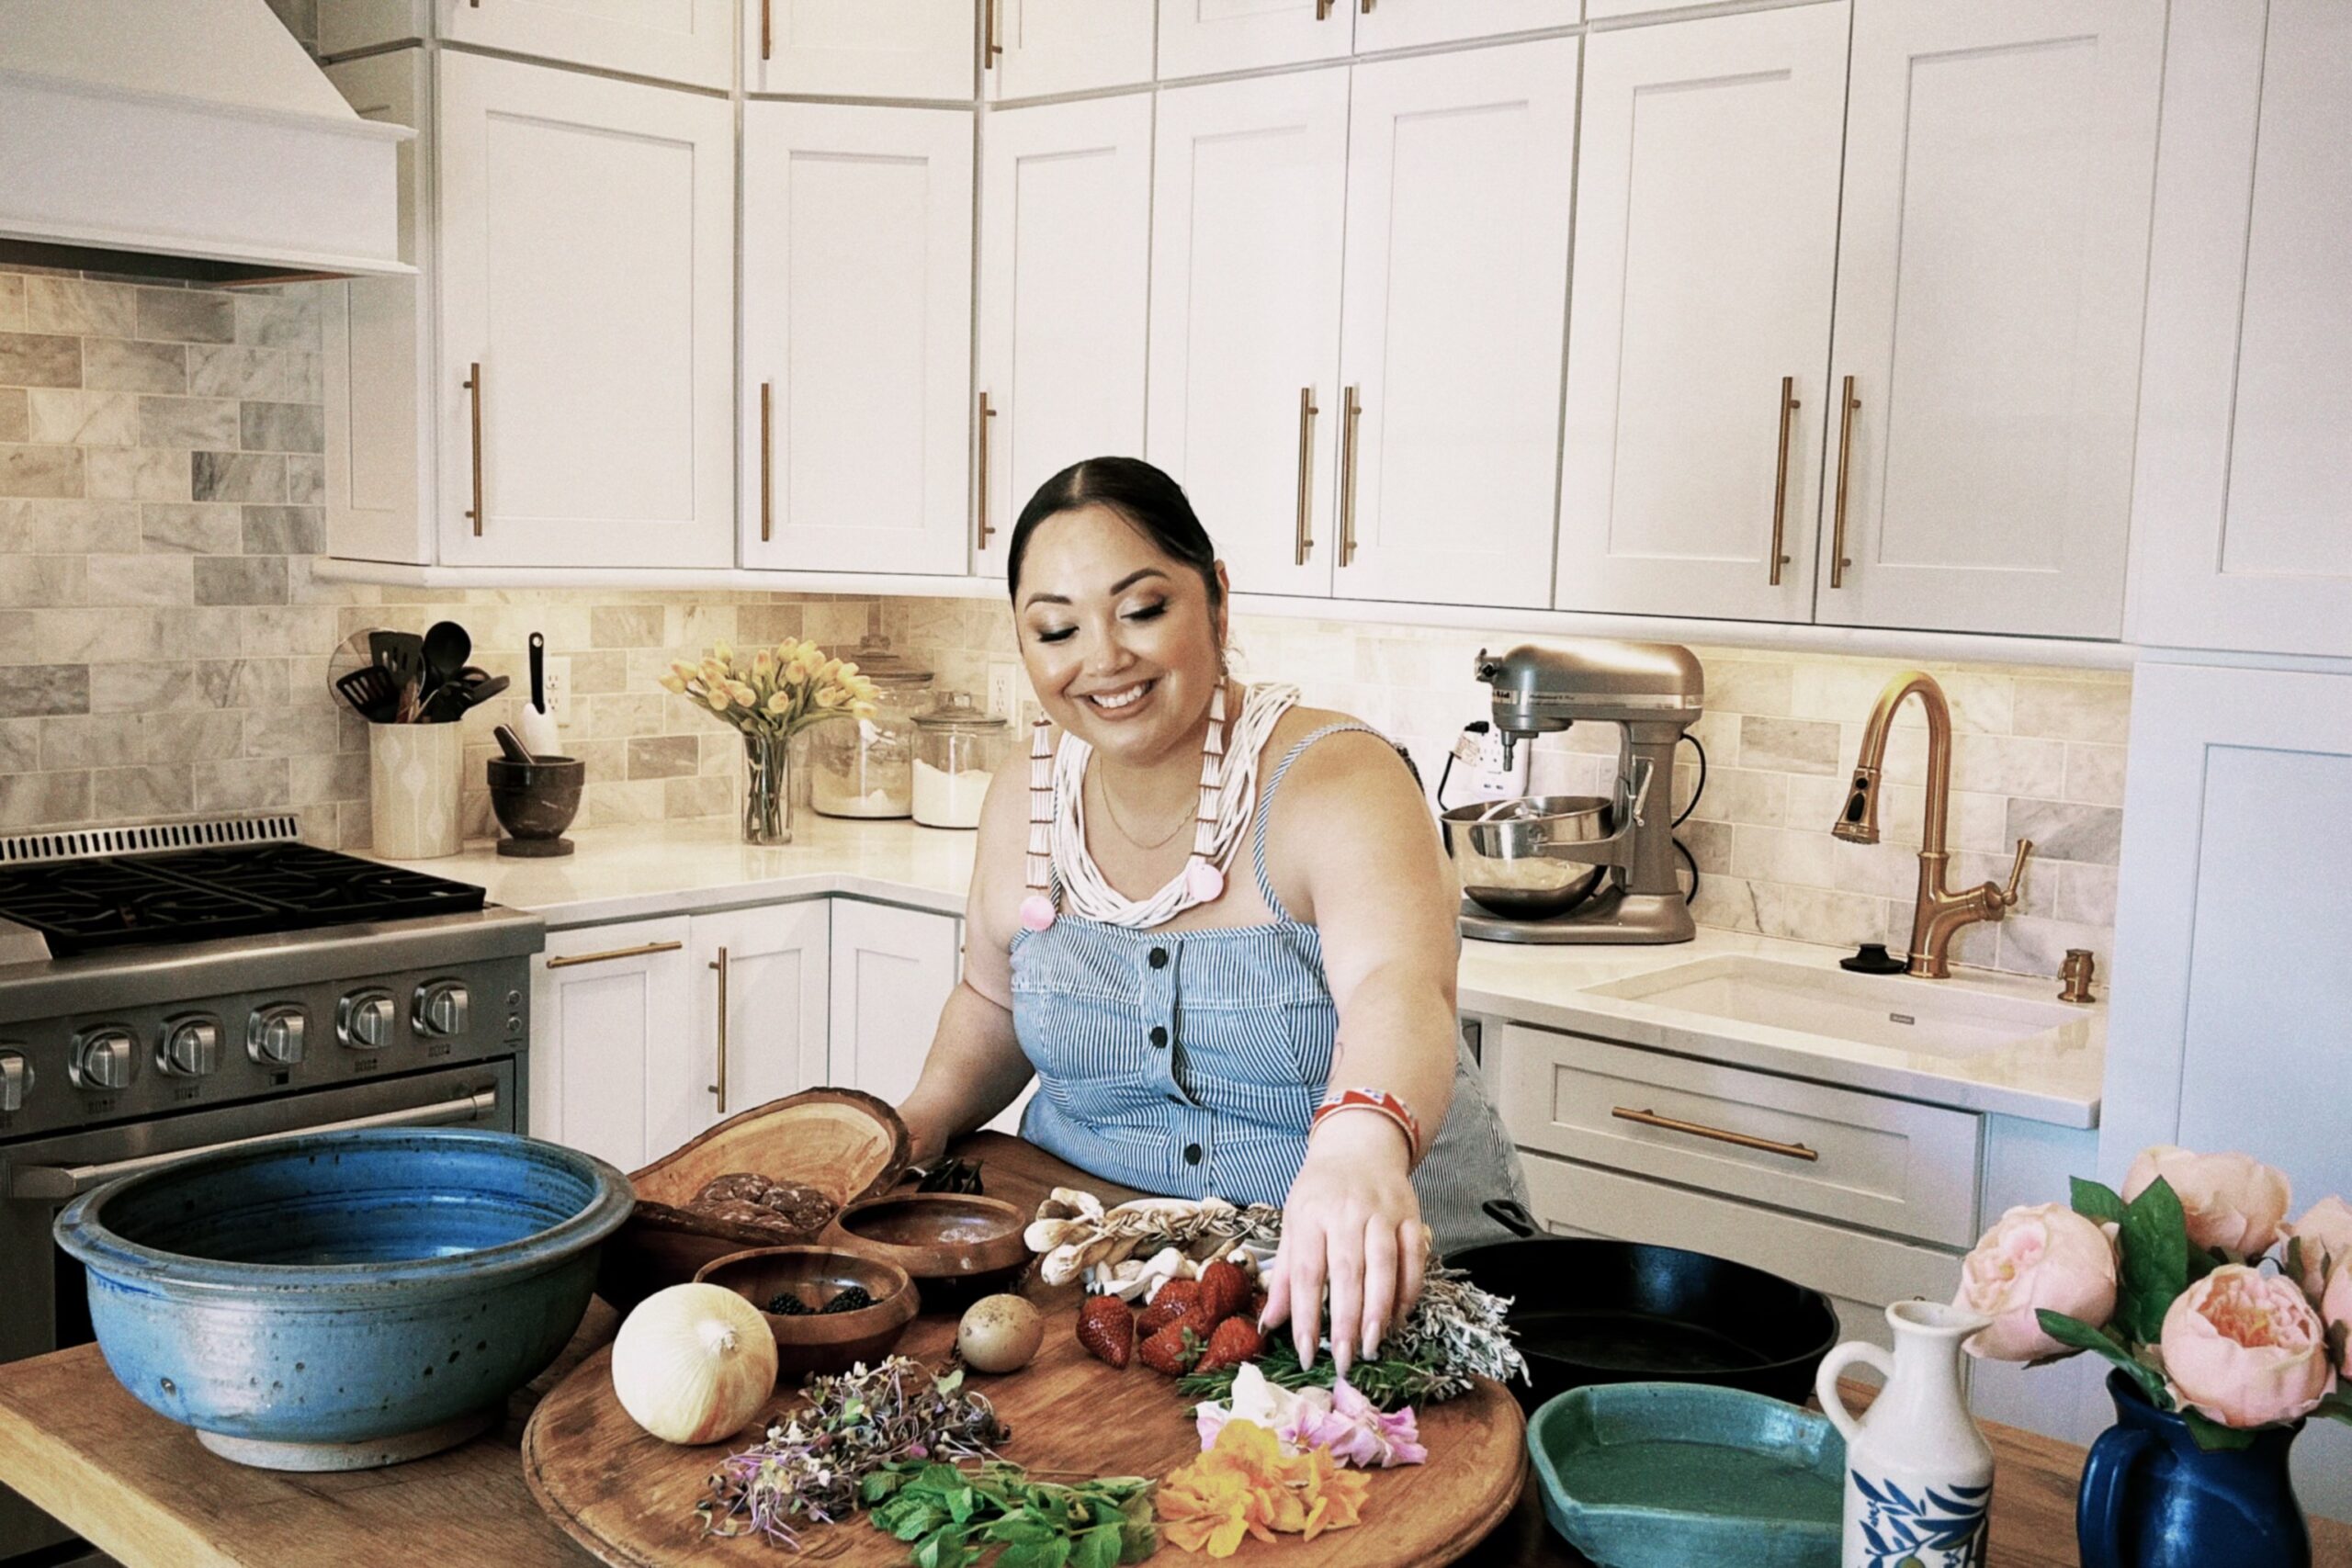 A smiling home chef displays an assortment of fresh ingredients on a wood cutting board.